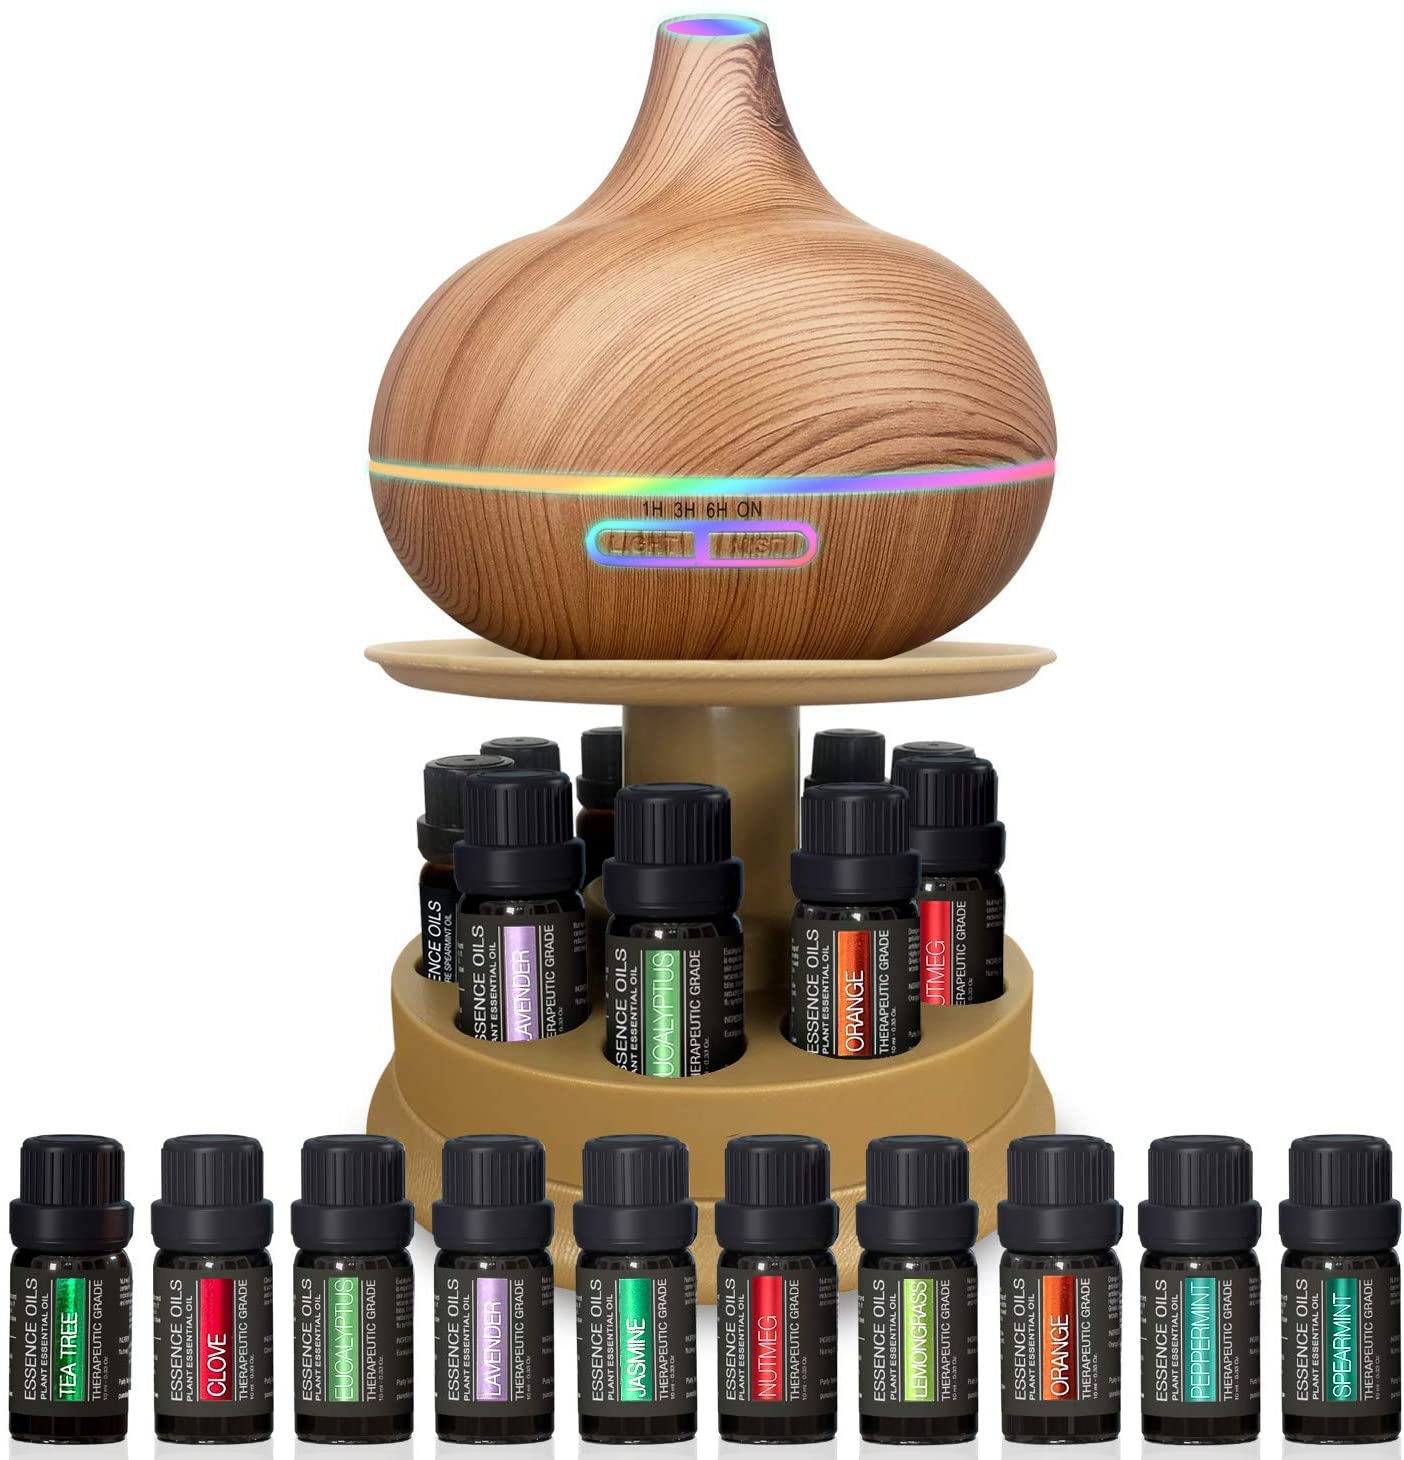 Ultimate Aromatherapy Ultrasonic 300ml Diffuser & Top 10 Therapeutic Grade Essential Oils Set w/Rotating Display Stand - 4 Timer & 7 Ambient Light Settings